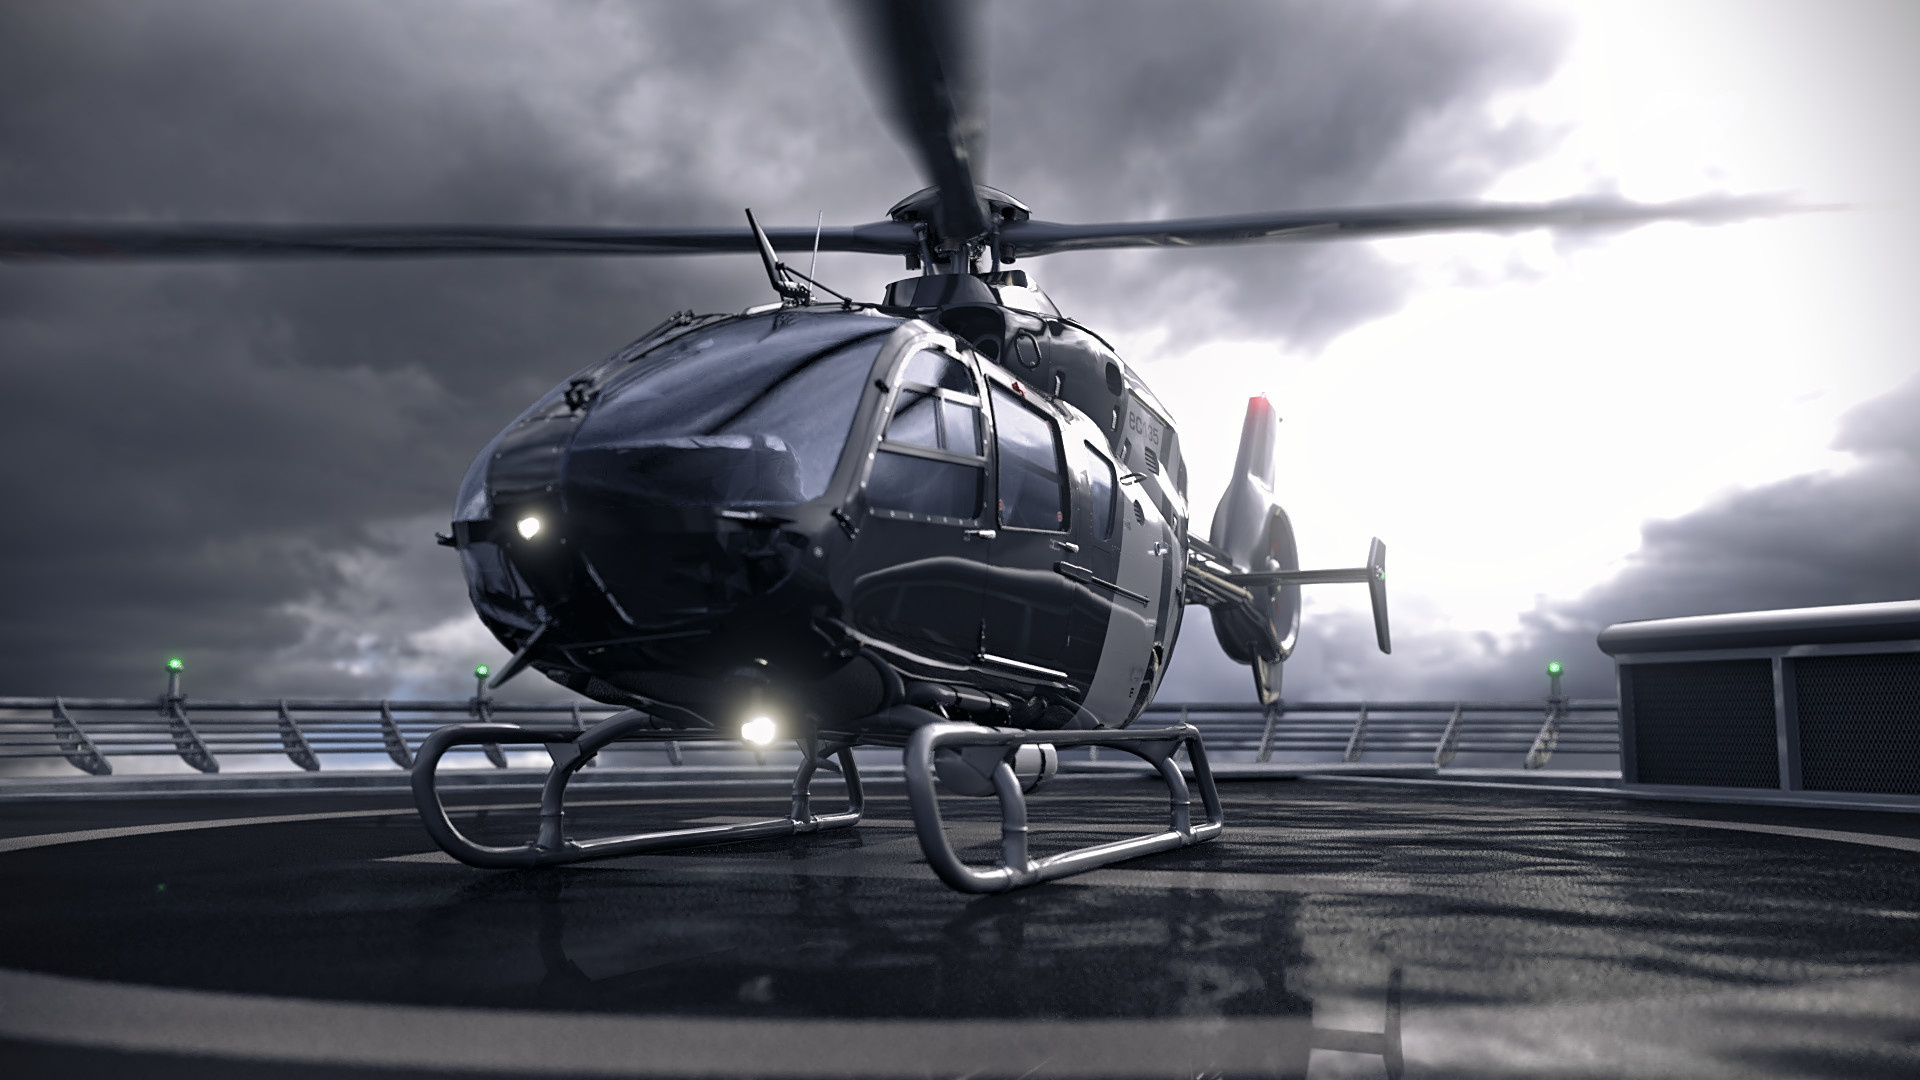 Eurocopter art, Eurocopter helicopter, High-quality wallpapers, 1920x1080 Full HD Desktop